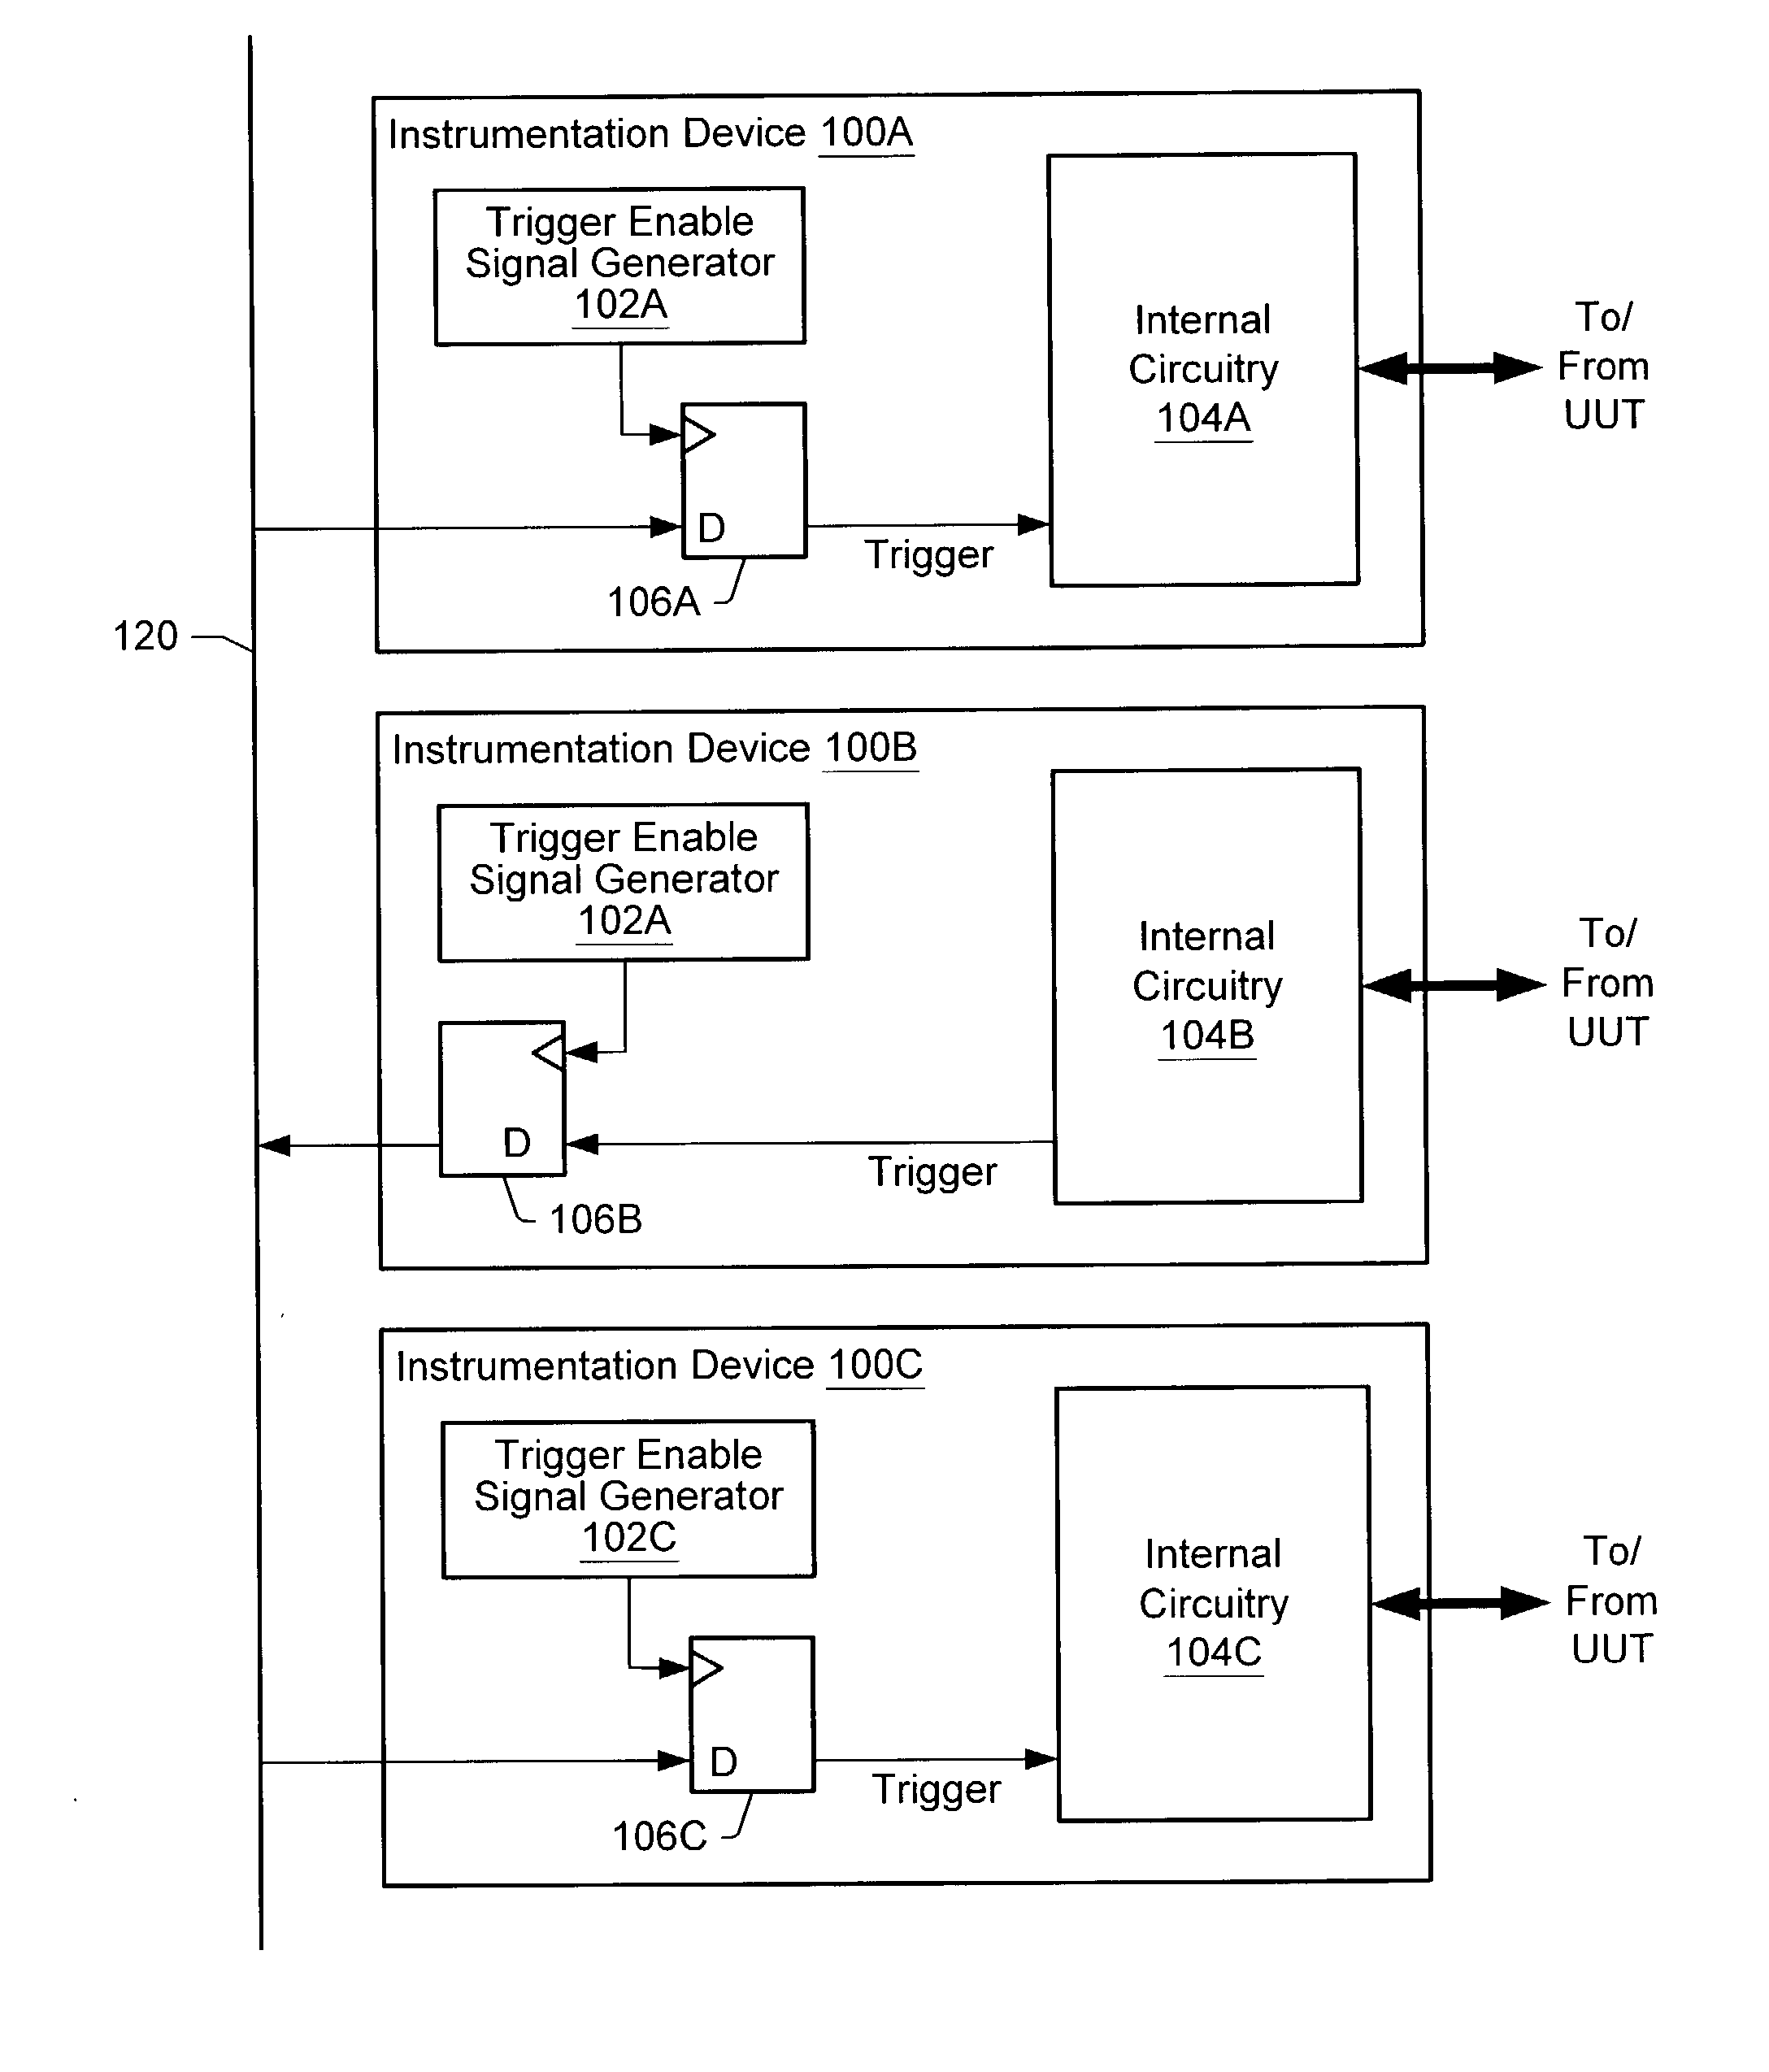 System and method for synchronizing multiple instrumentation devices